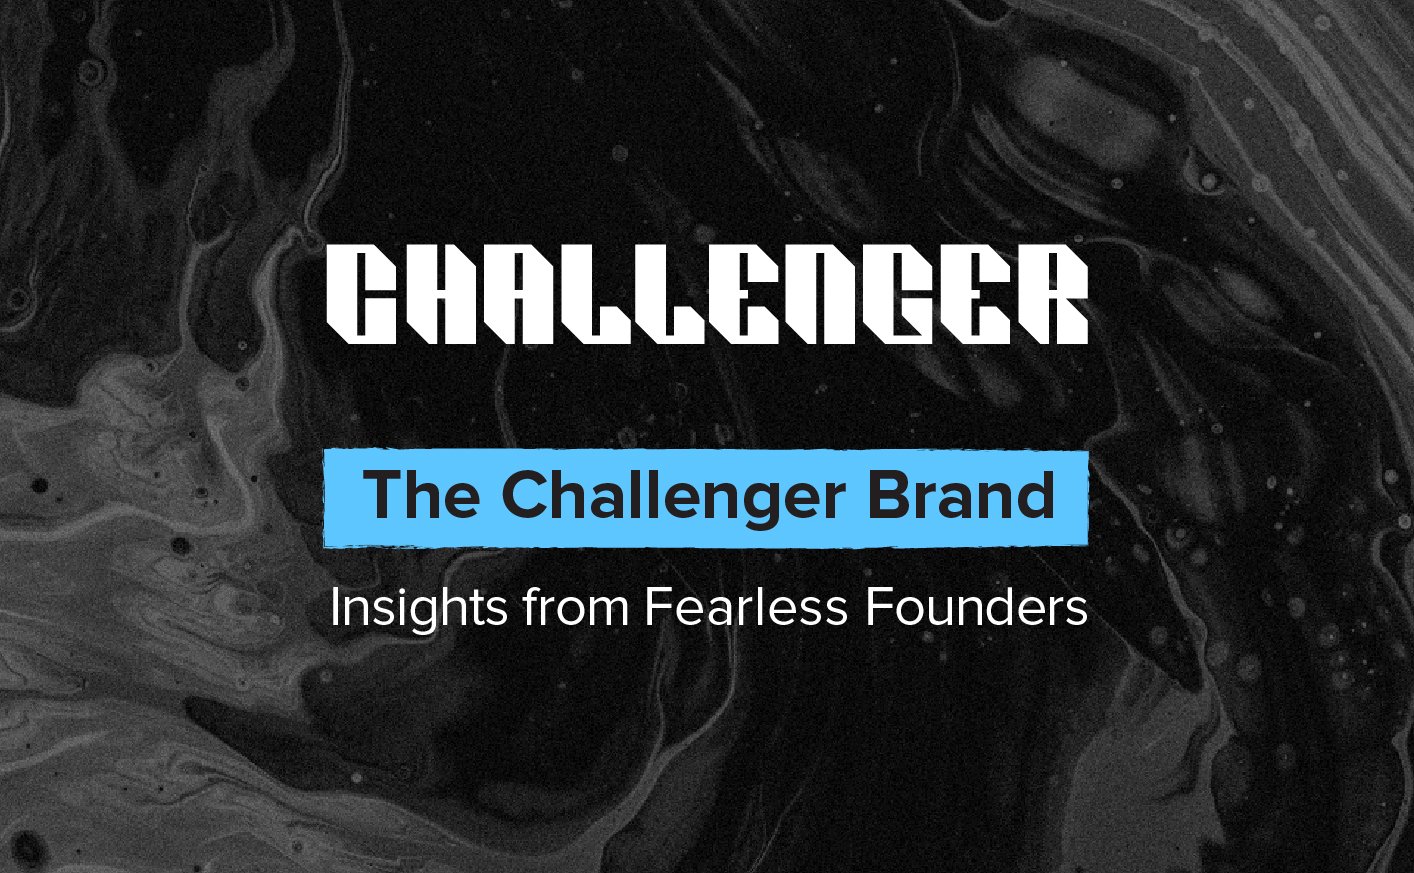 The Challenger Brand: Insights from Fearless Founders